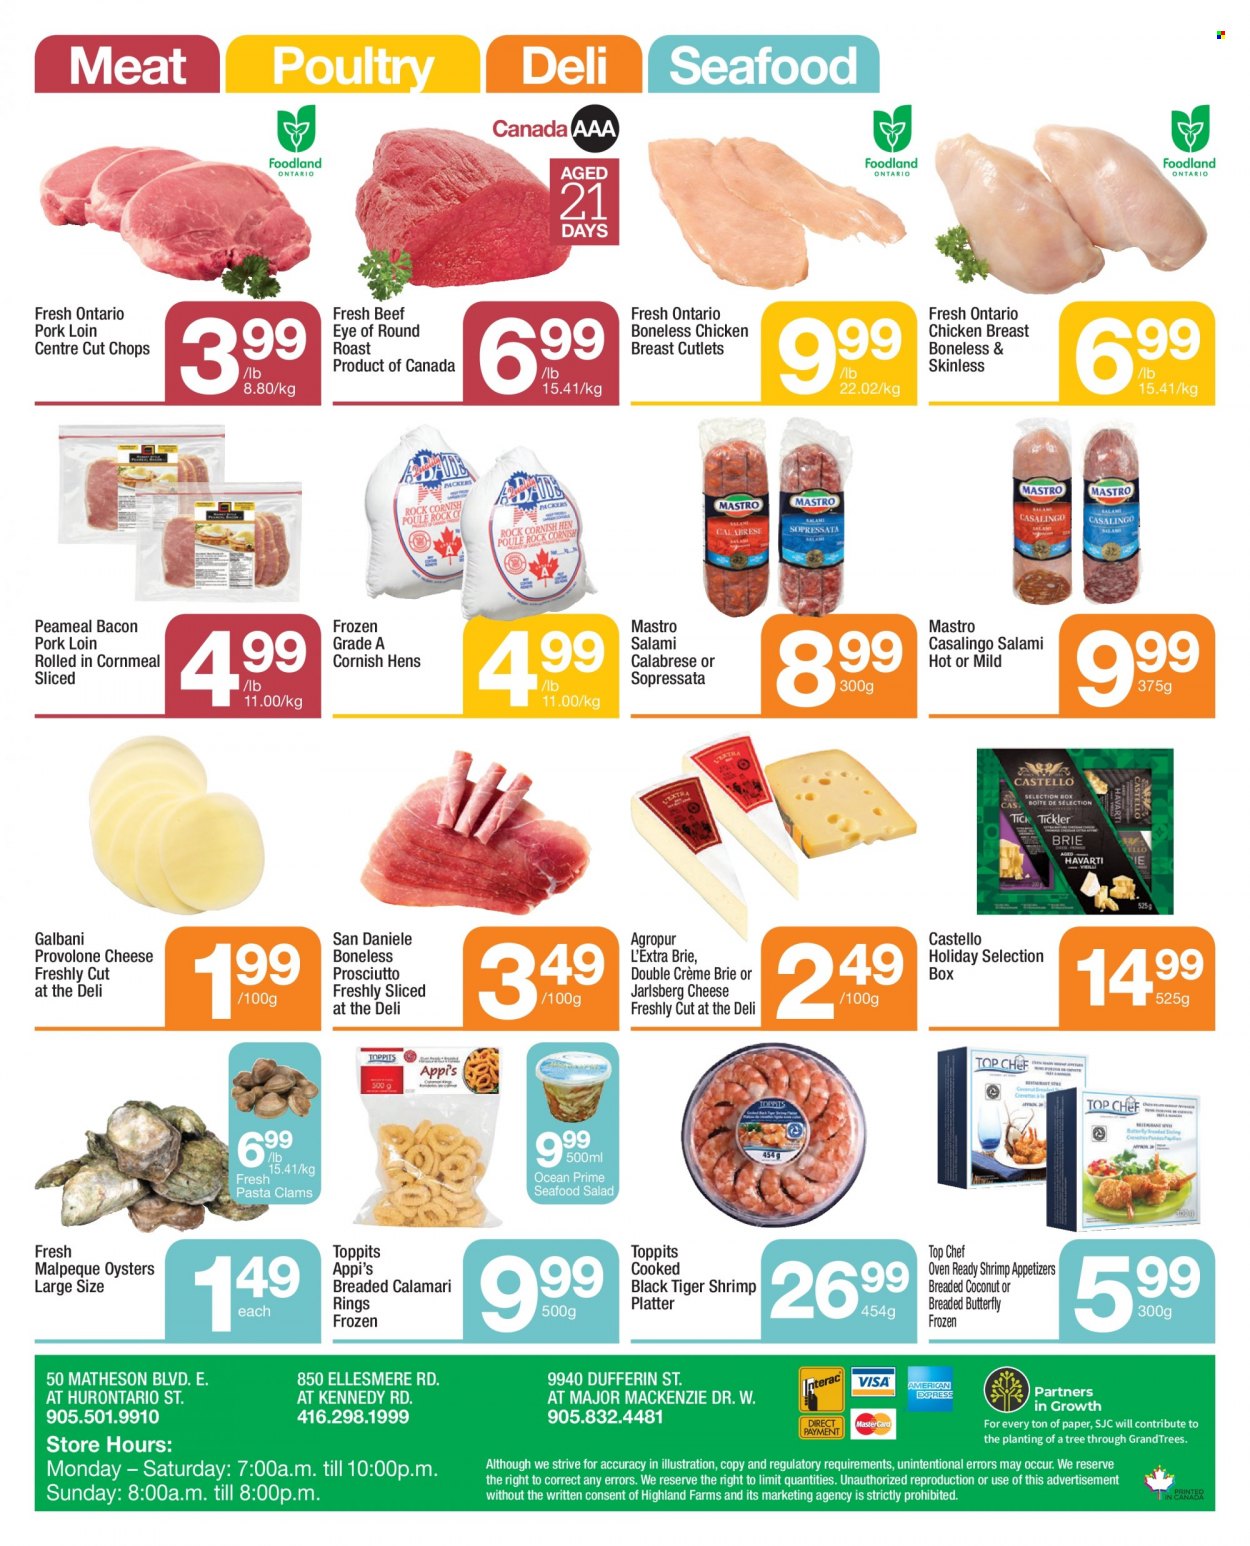 thumbnail - Highland Farms Flyer - December 30, 2021 - January 05, 2022 - Sales products - salad, calamari, clams, oysters, seafood, shrimps, bacon, salami, prosciutto, seafood salad, cheese, brie, Galbani, Provolone, chicken, beef meat, eye of round, round roast, pork loin, pork meat. Page 4.